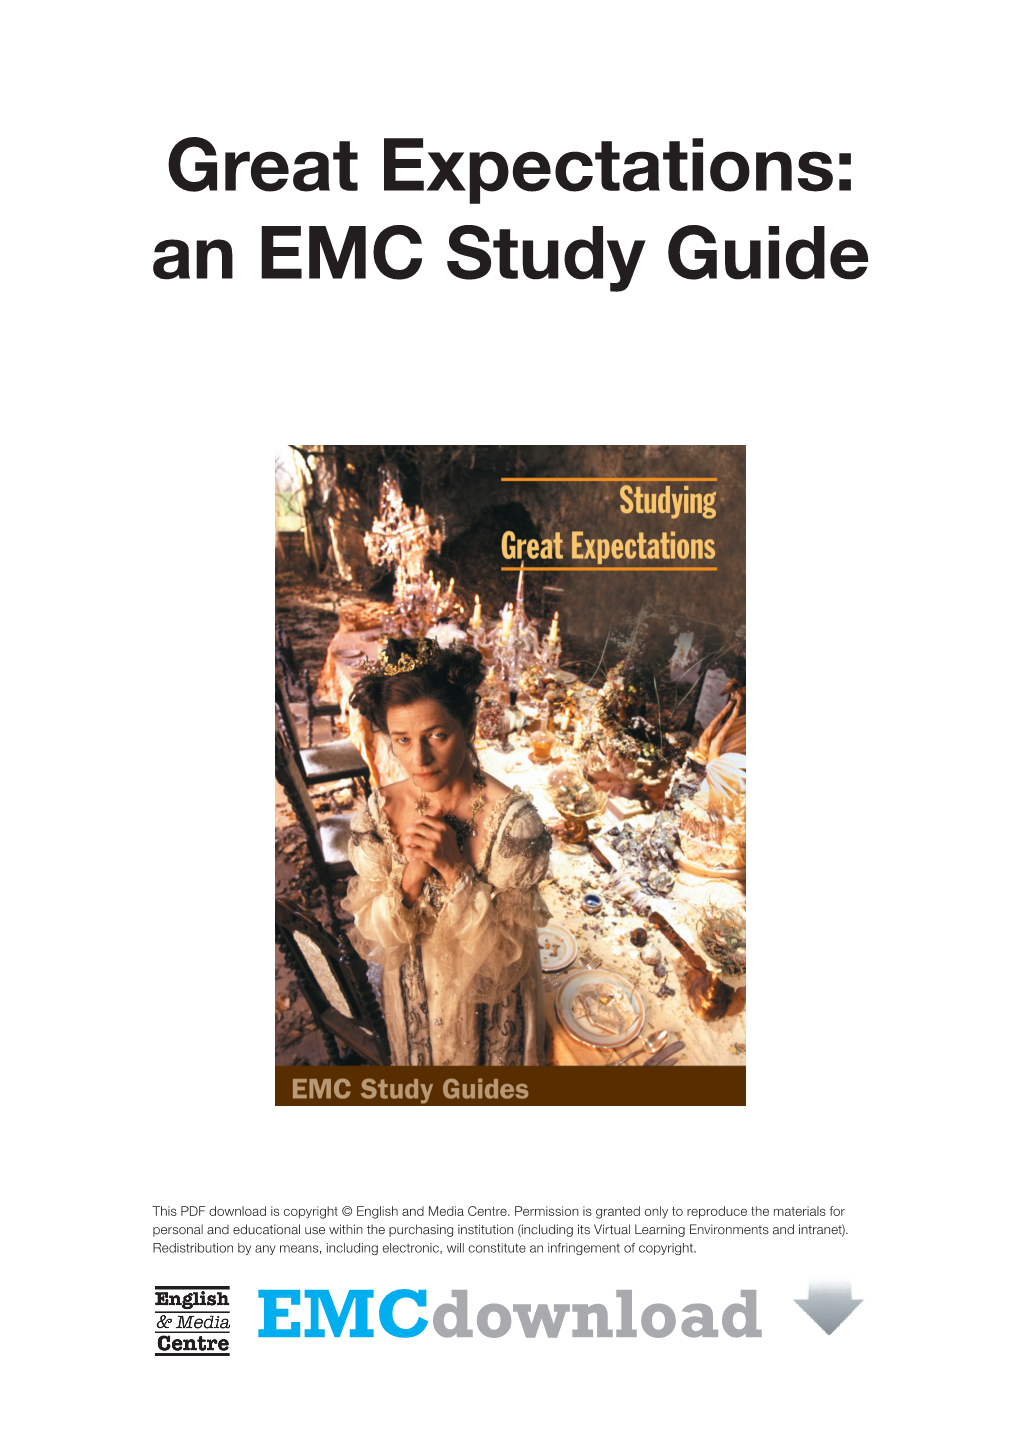 Great Expectations: an EMC Study Guide